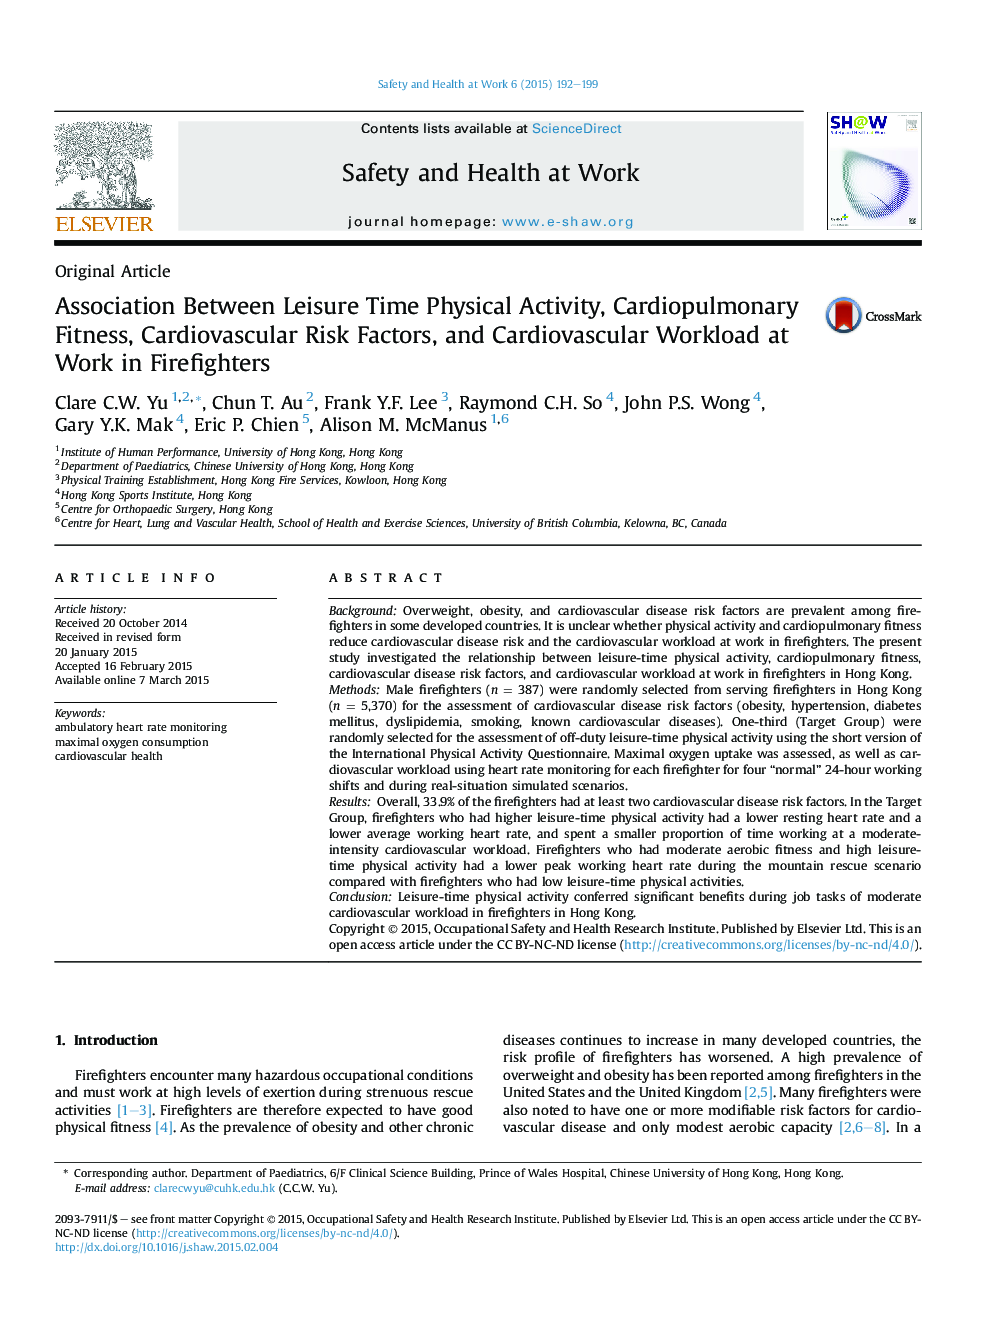 Association Between Leisure Time Physical Activity, Cardiopulmonary Fitness, Cardiovascular Risk Factors, and Cardiovascular Workload at Work in Firefighters 